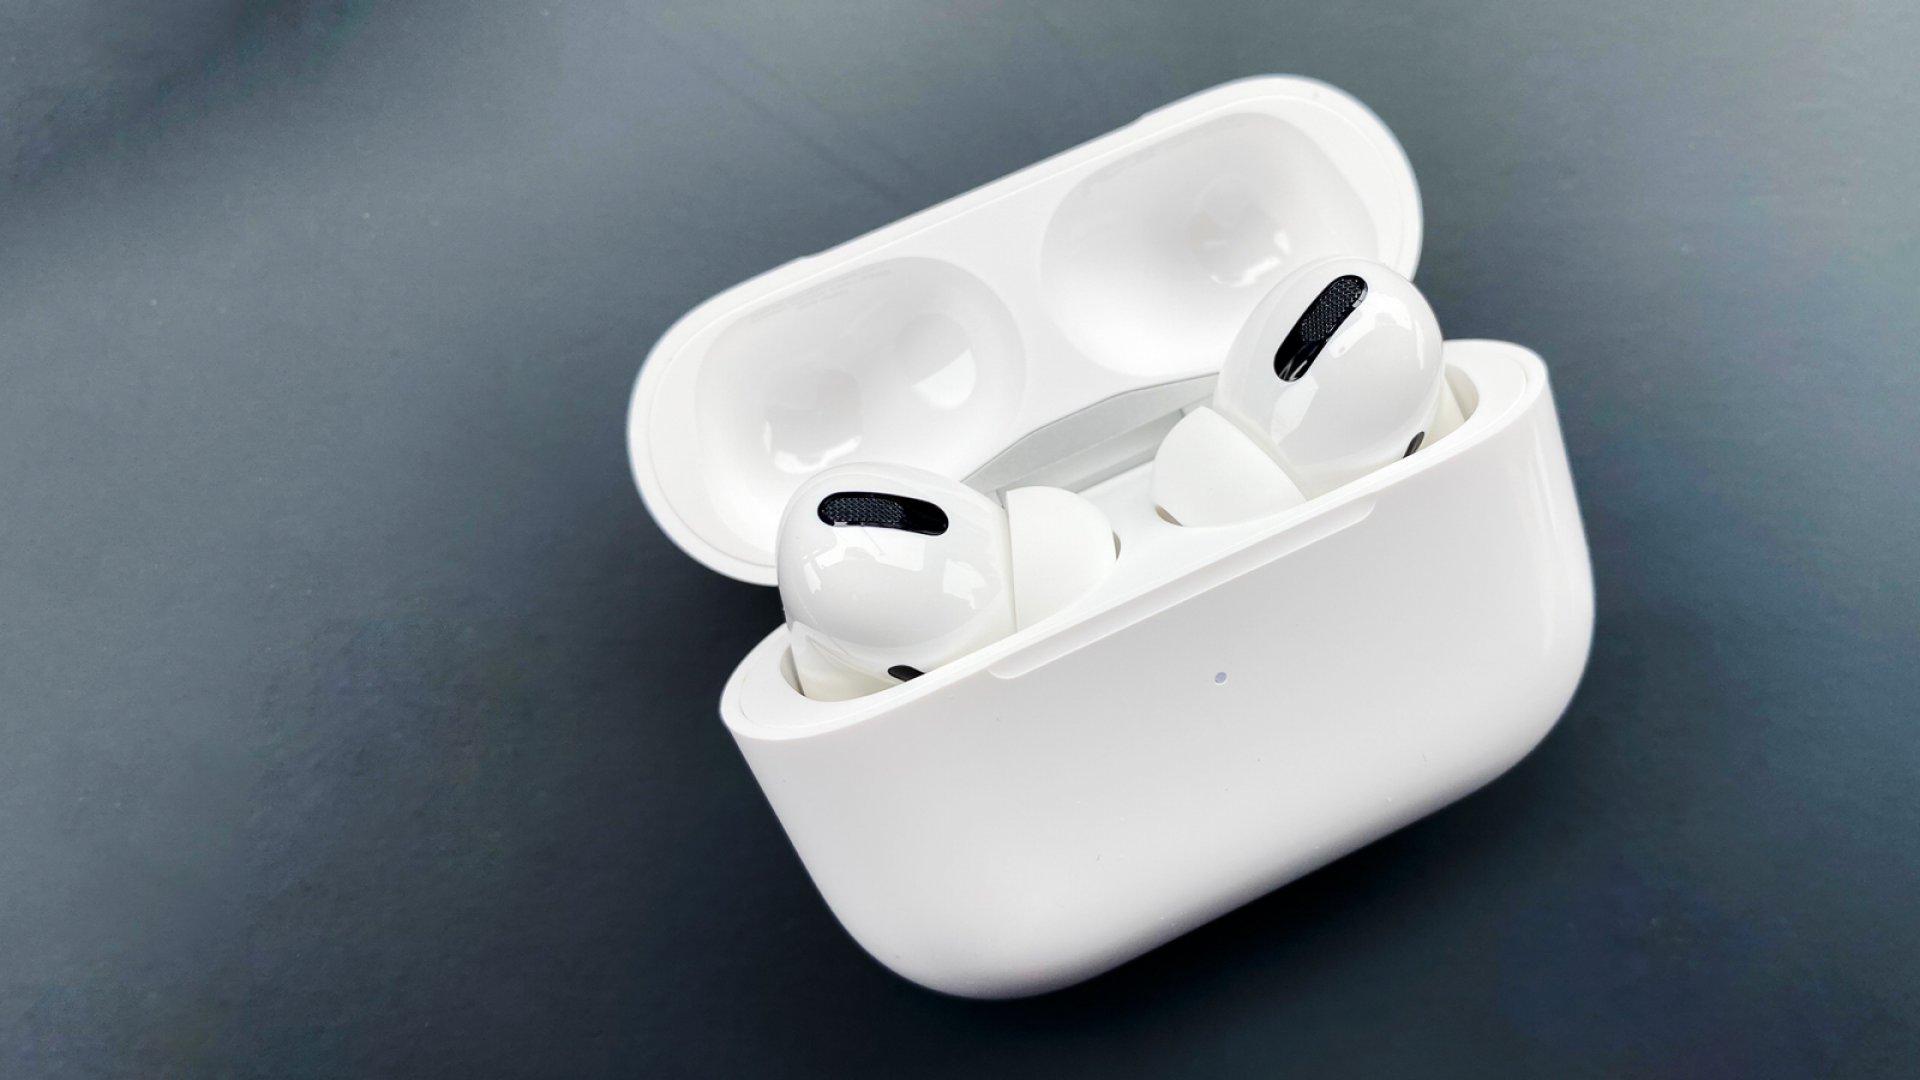 Airpods air pro. Air pods Pro 2. Apple AIRPODS 2. Apple AIRPODS Pro Pro 2. AIRPODS Pro 2 2022.